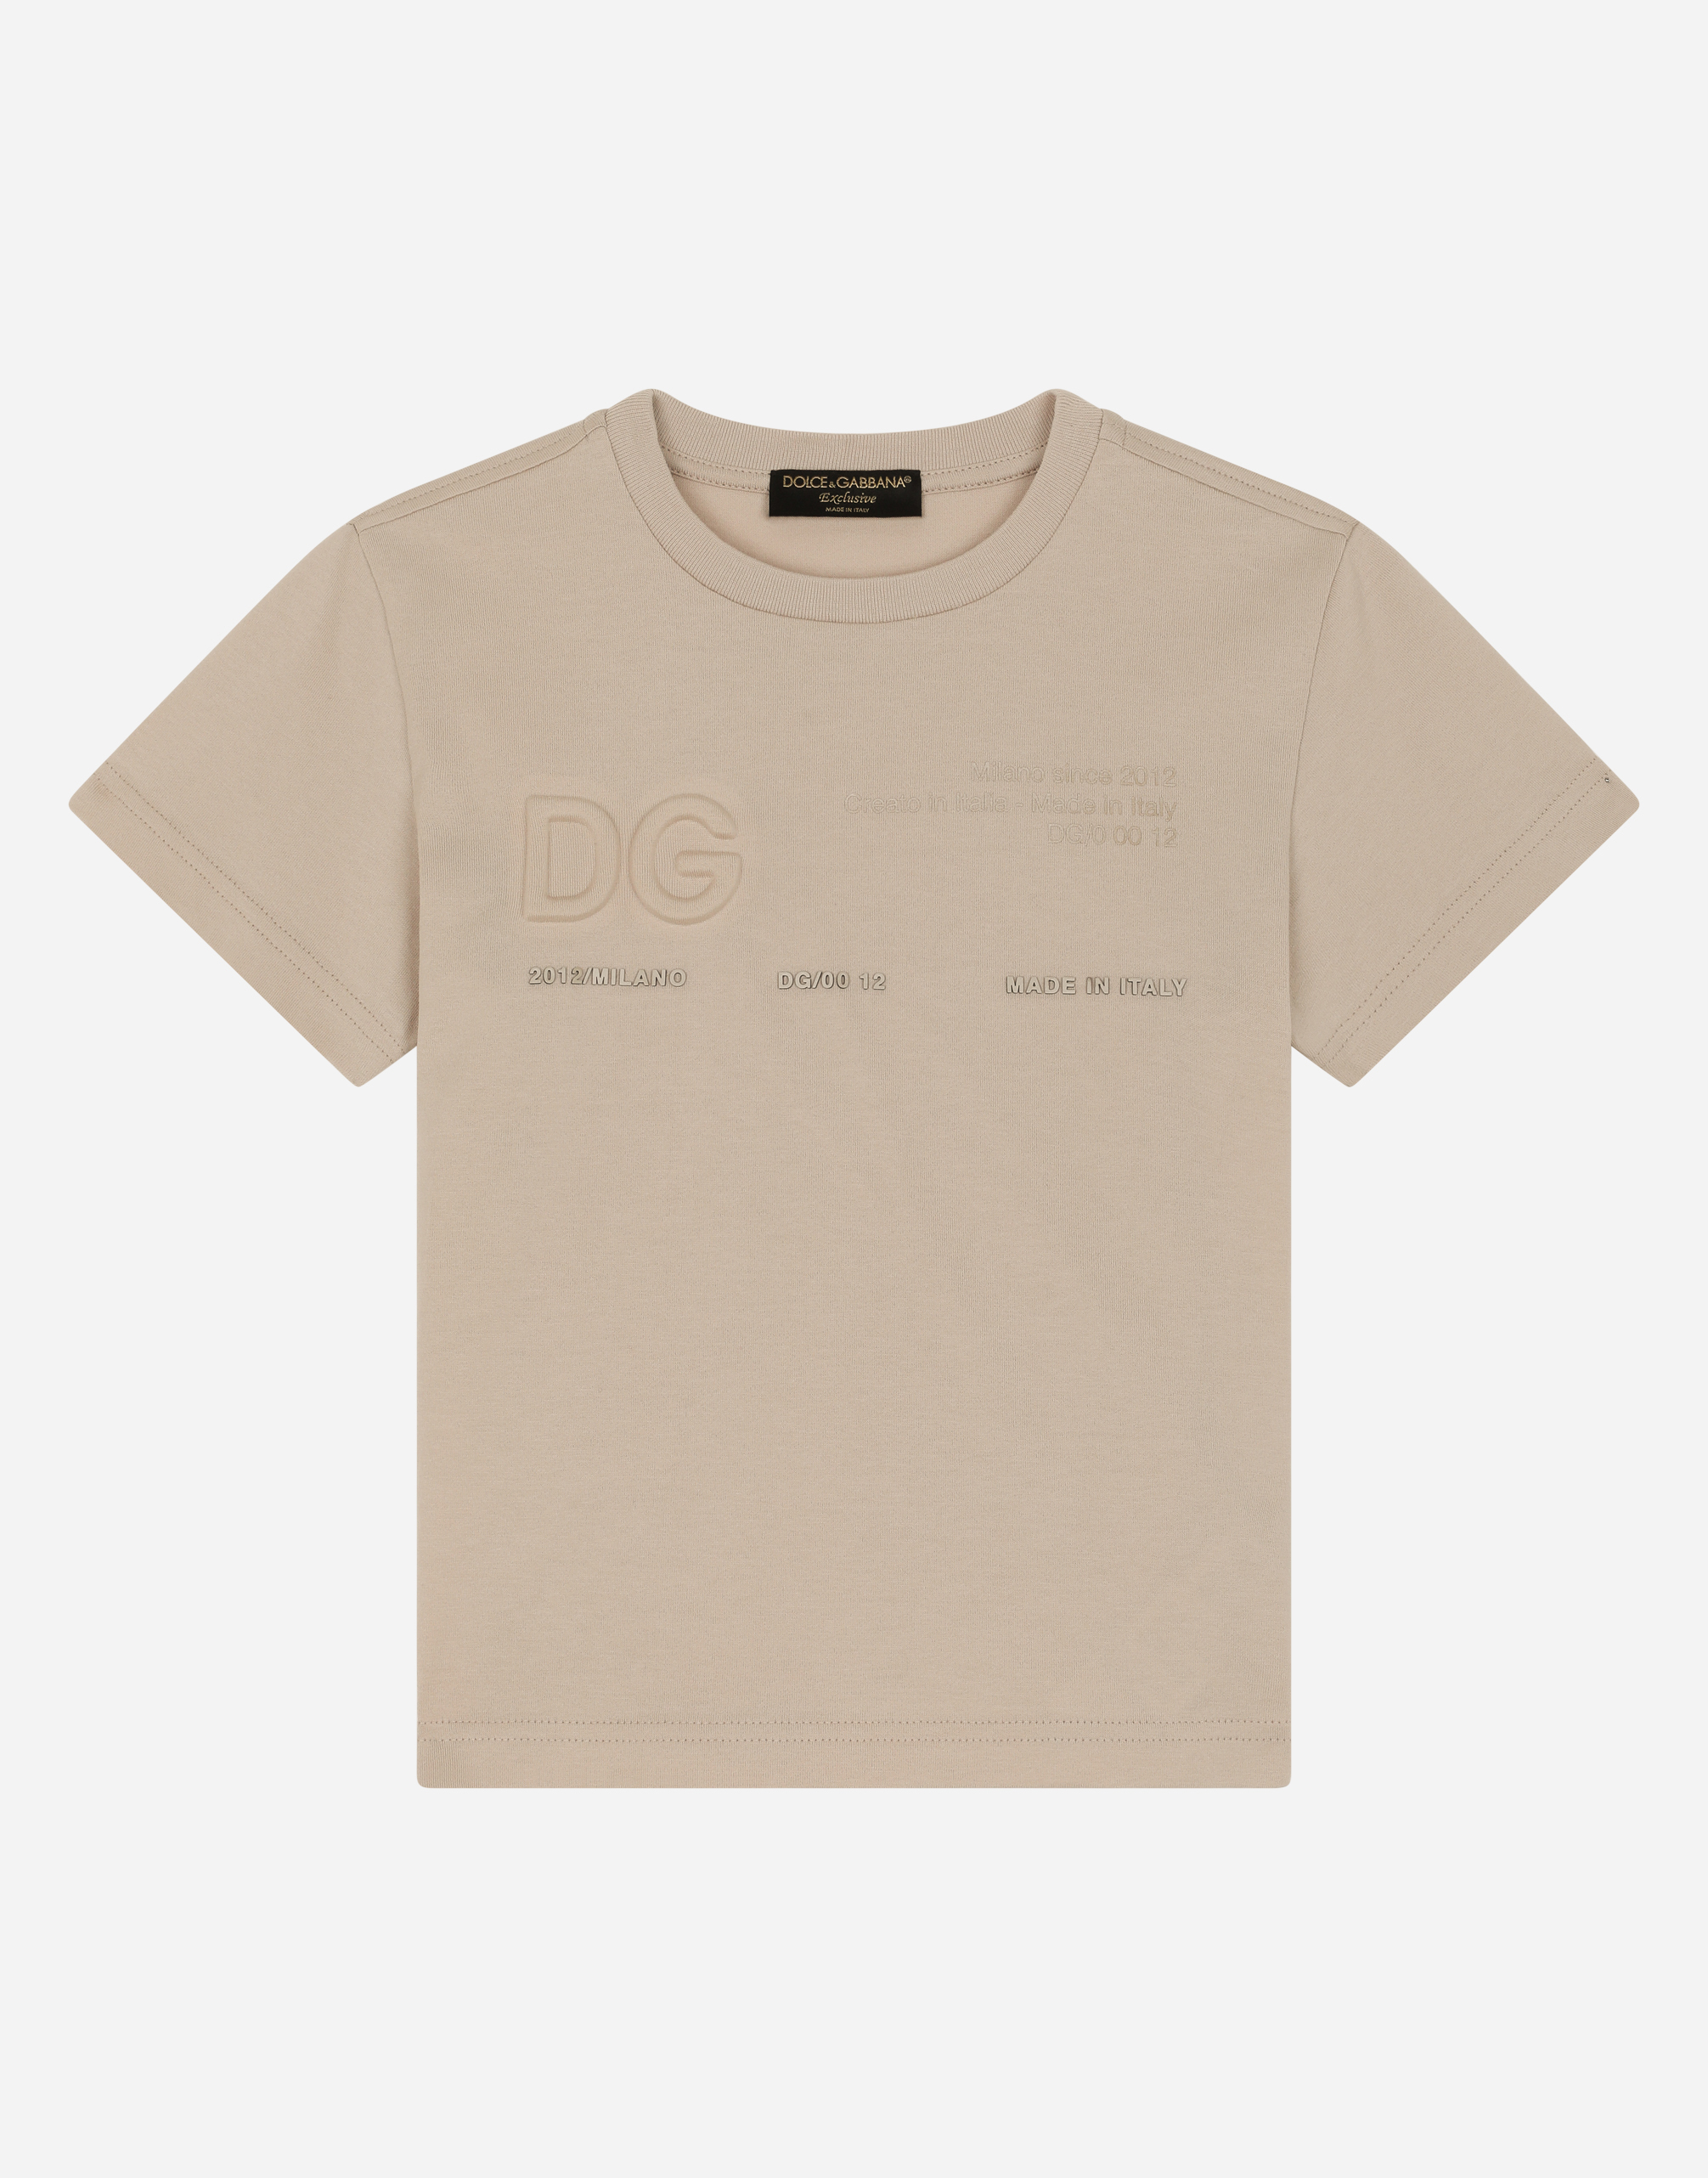 Dolce & Gabbana Kids' Jersey T-shirt With Dg Embroidery